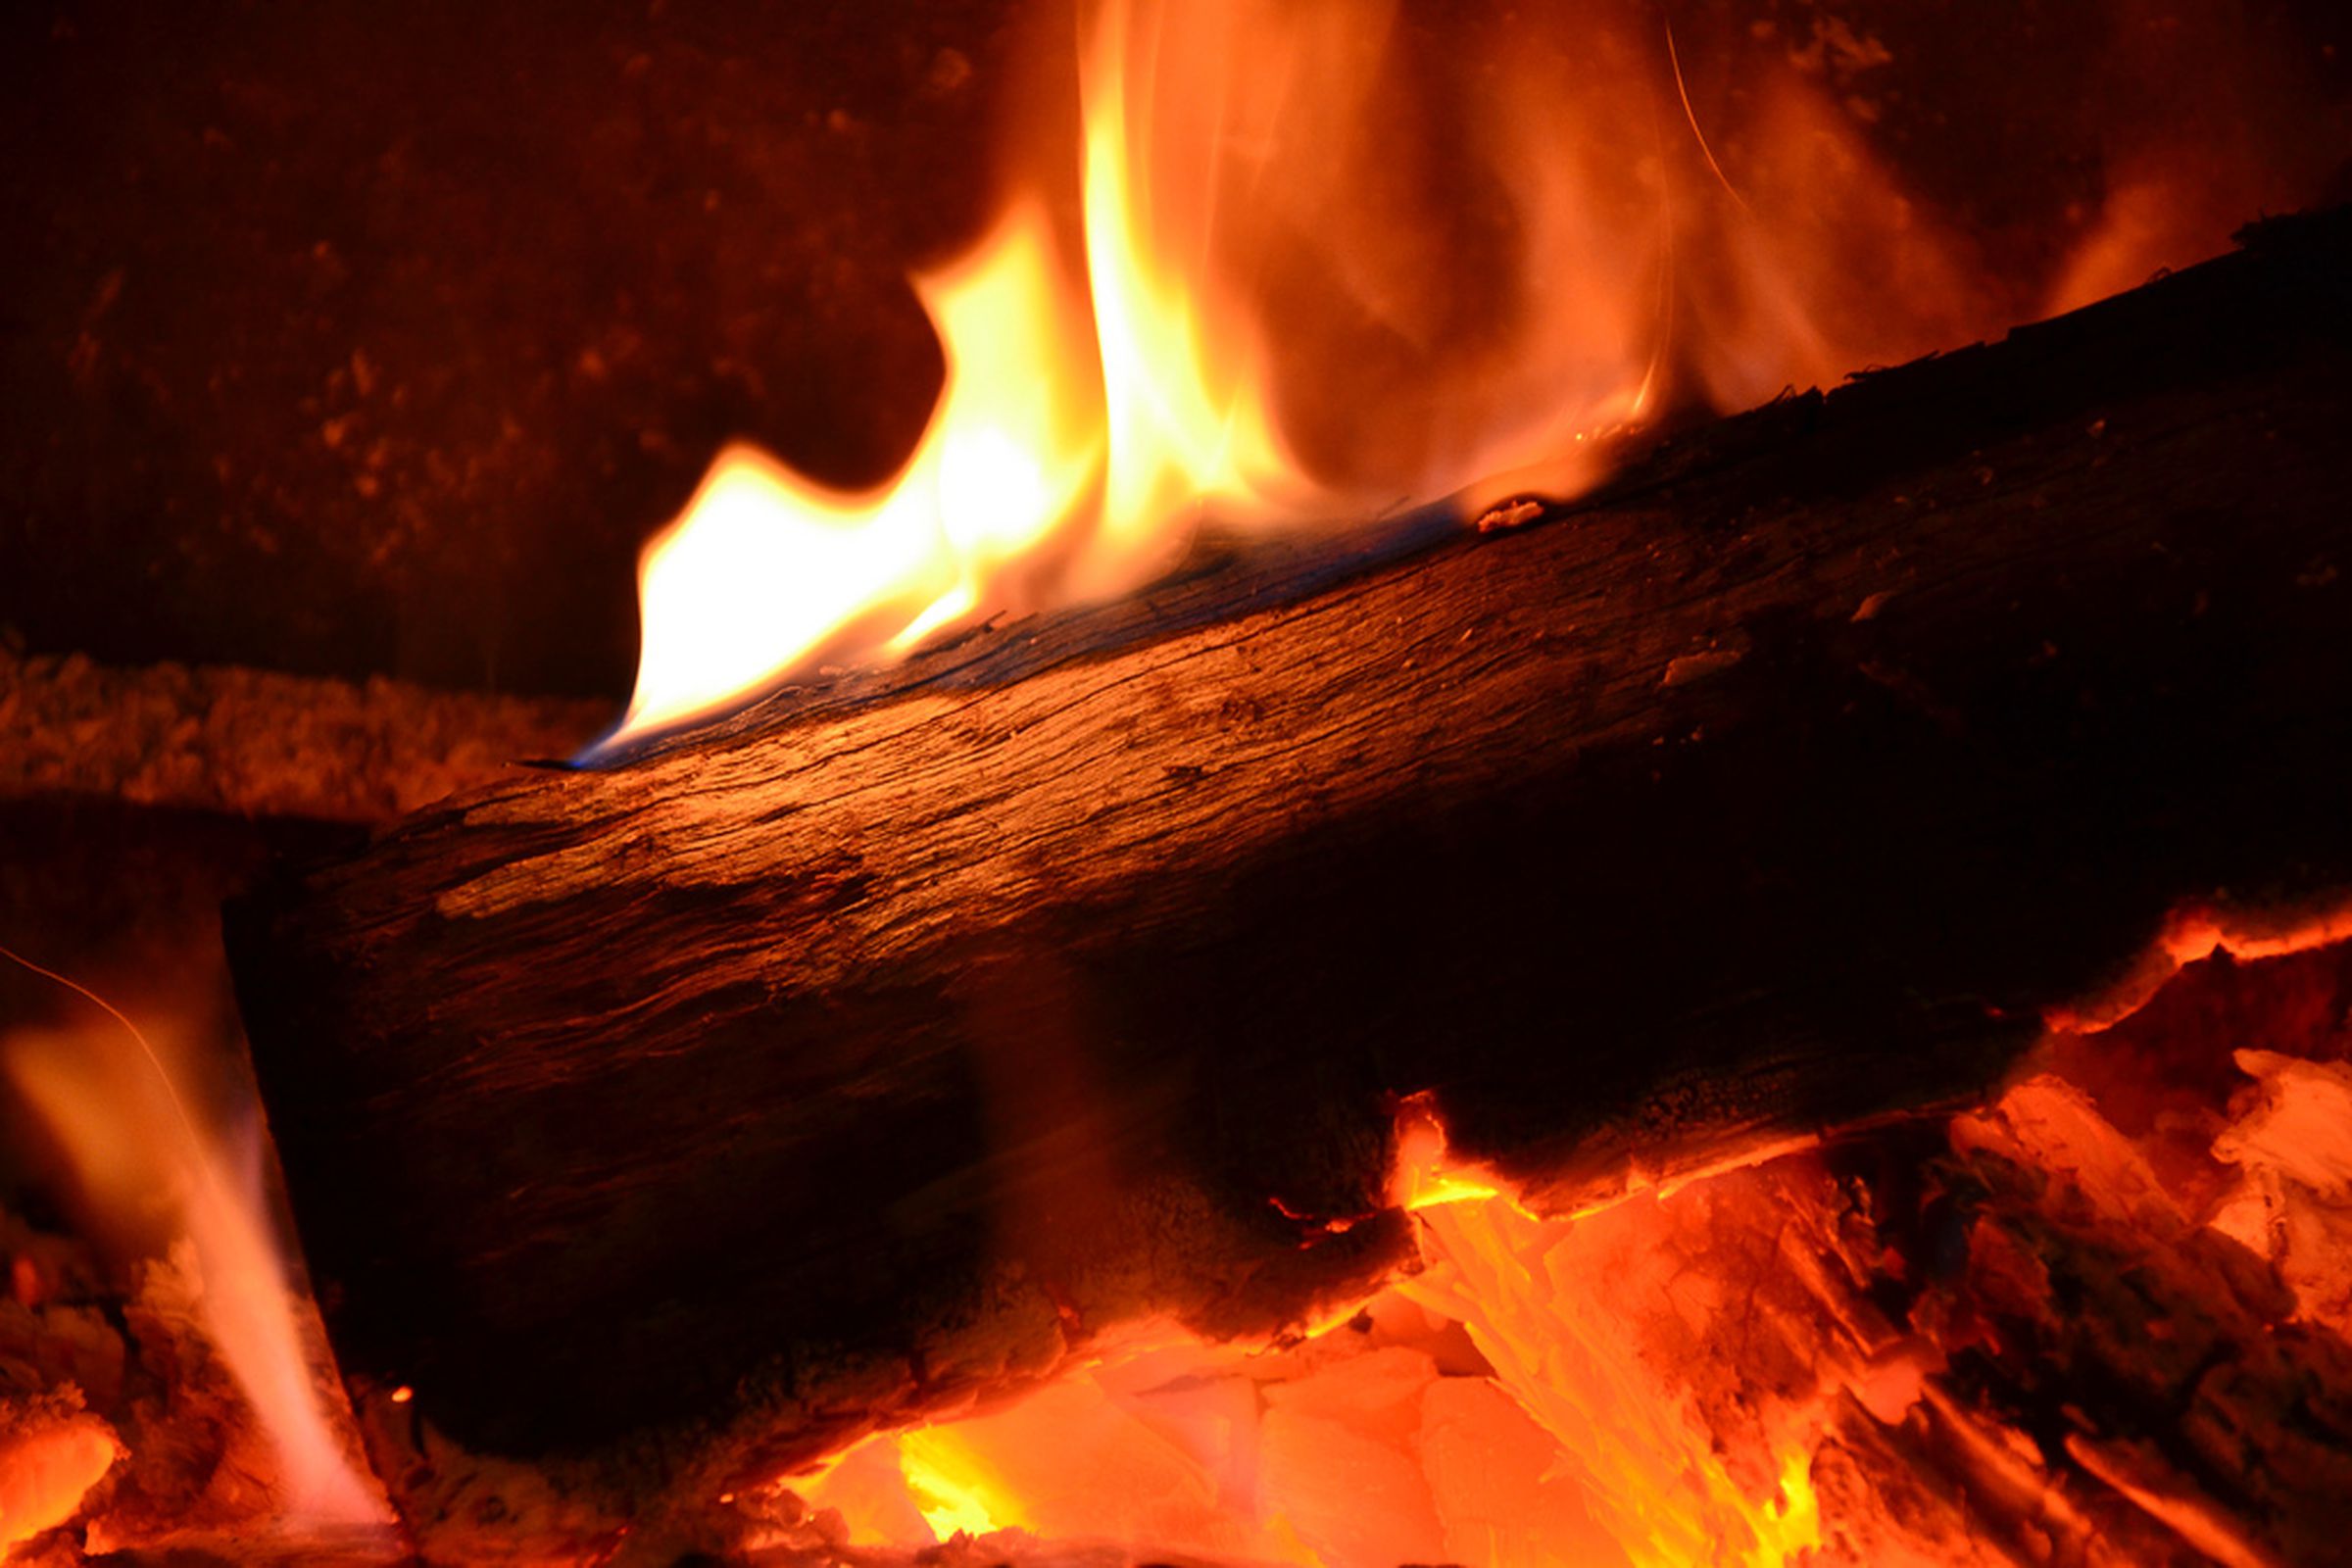 Fireplace (Flickr)